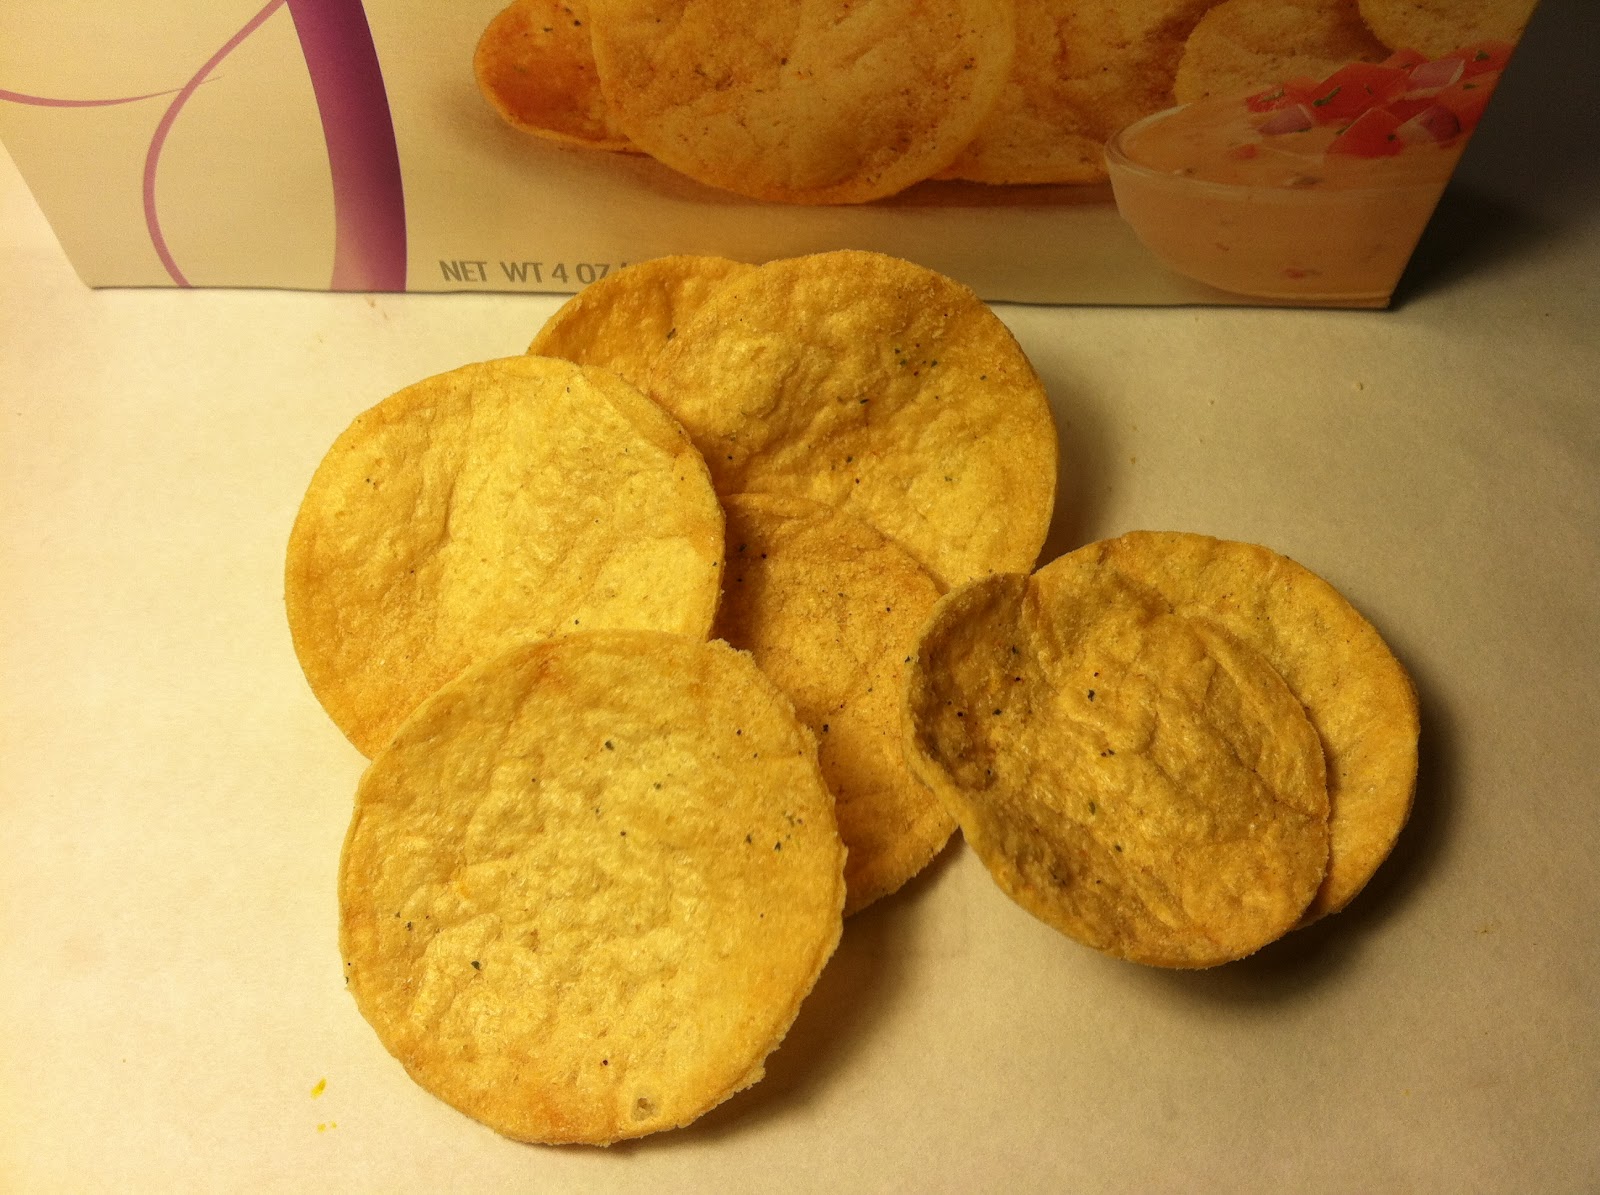 Special K Cracker Chips Review